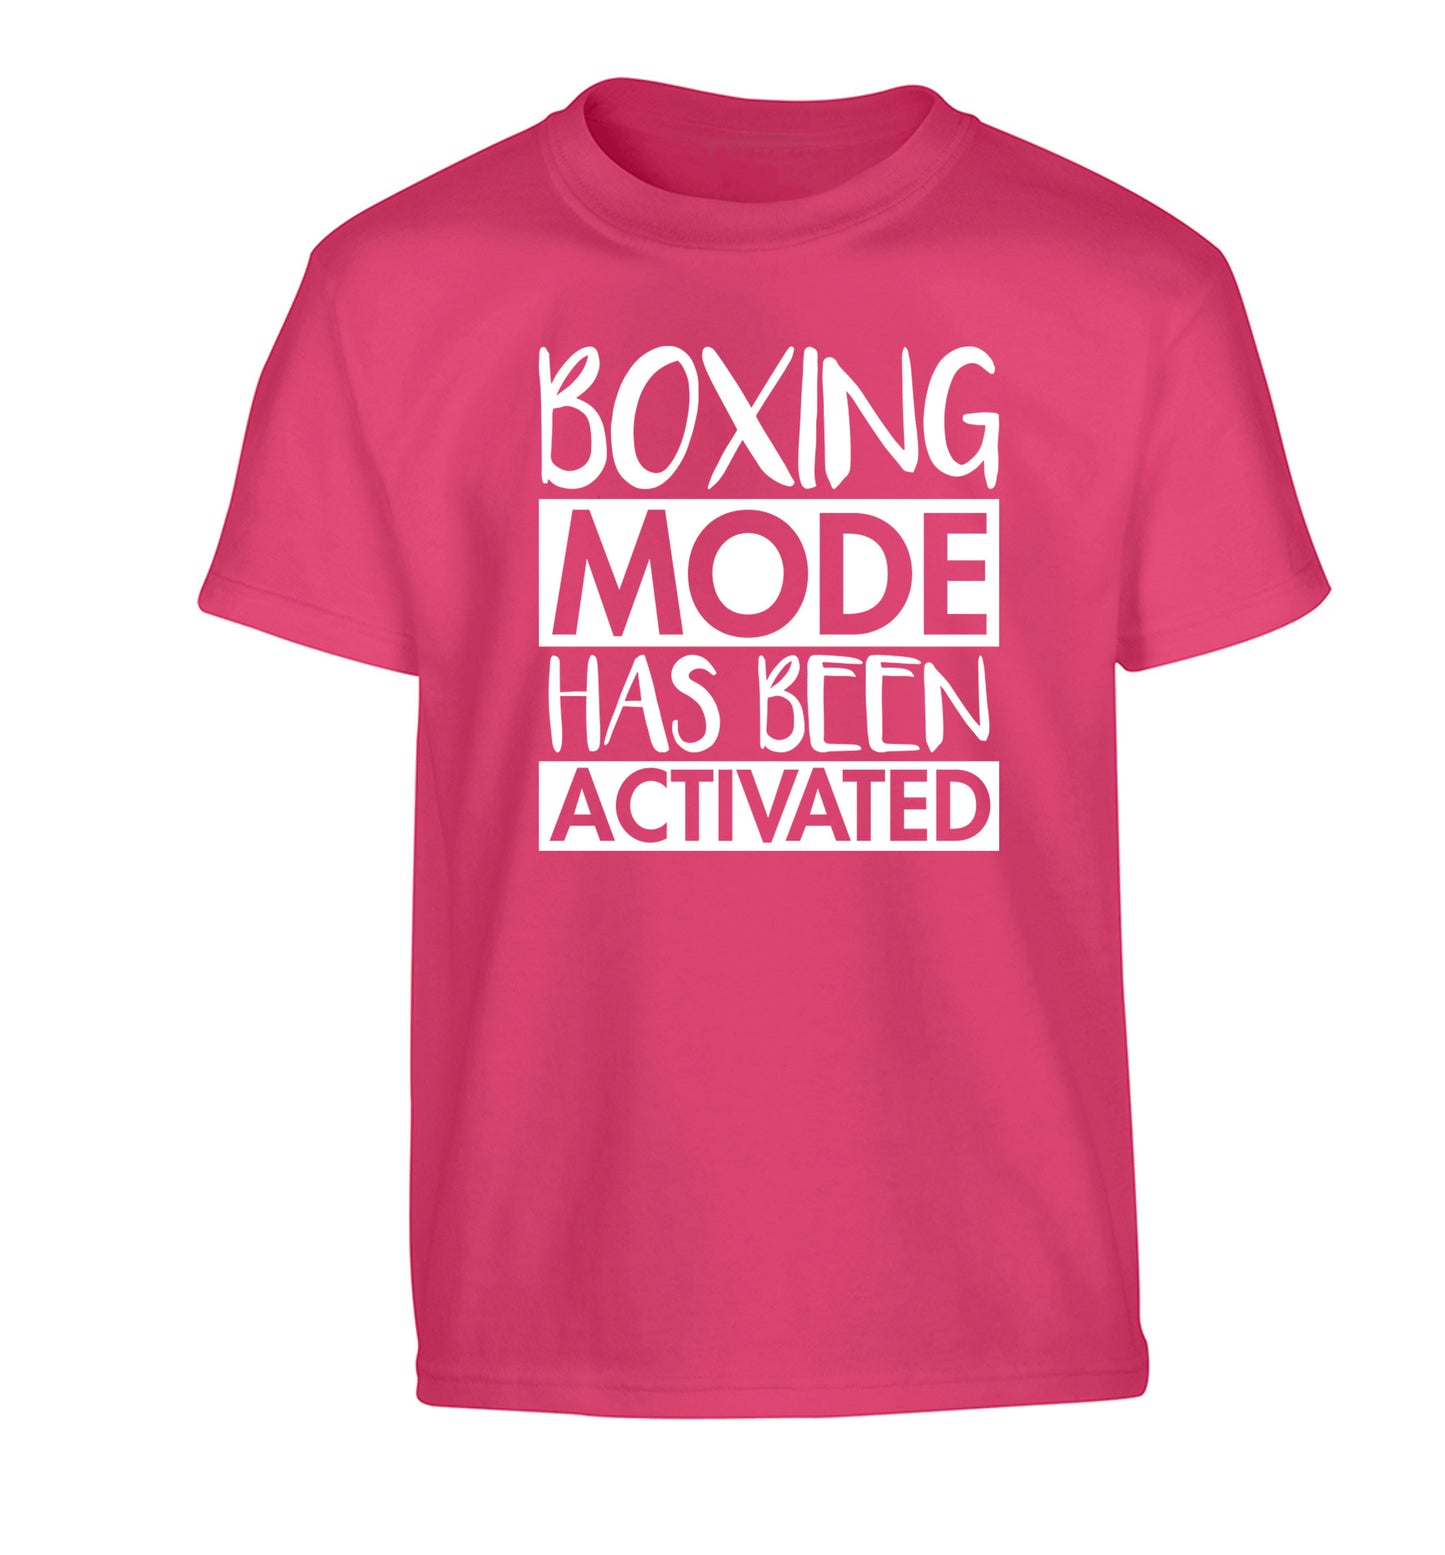 Boxing mode activated Children's pink Tshirt 12-14 Years